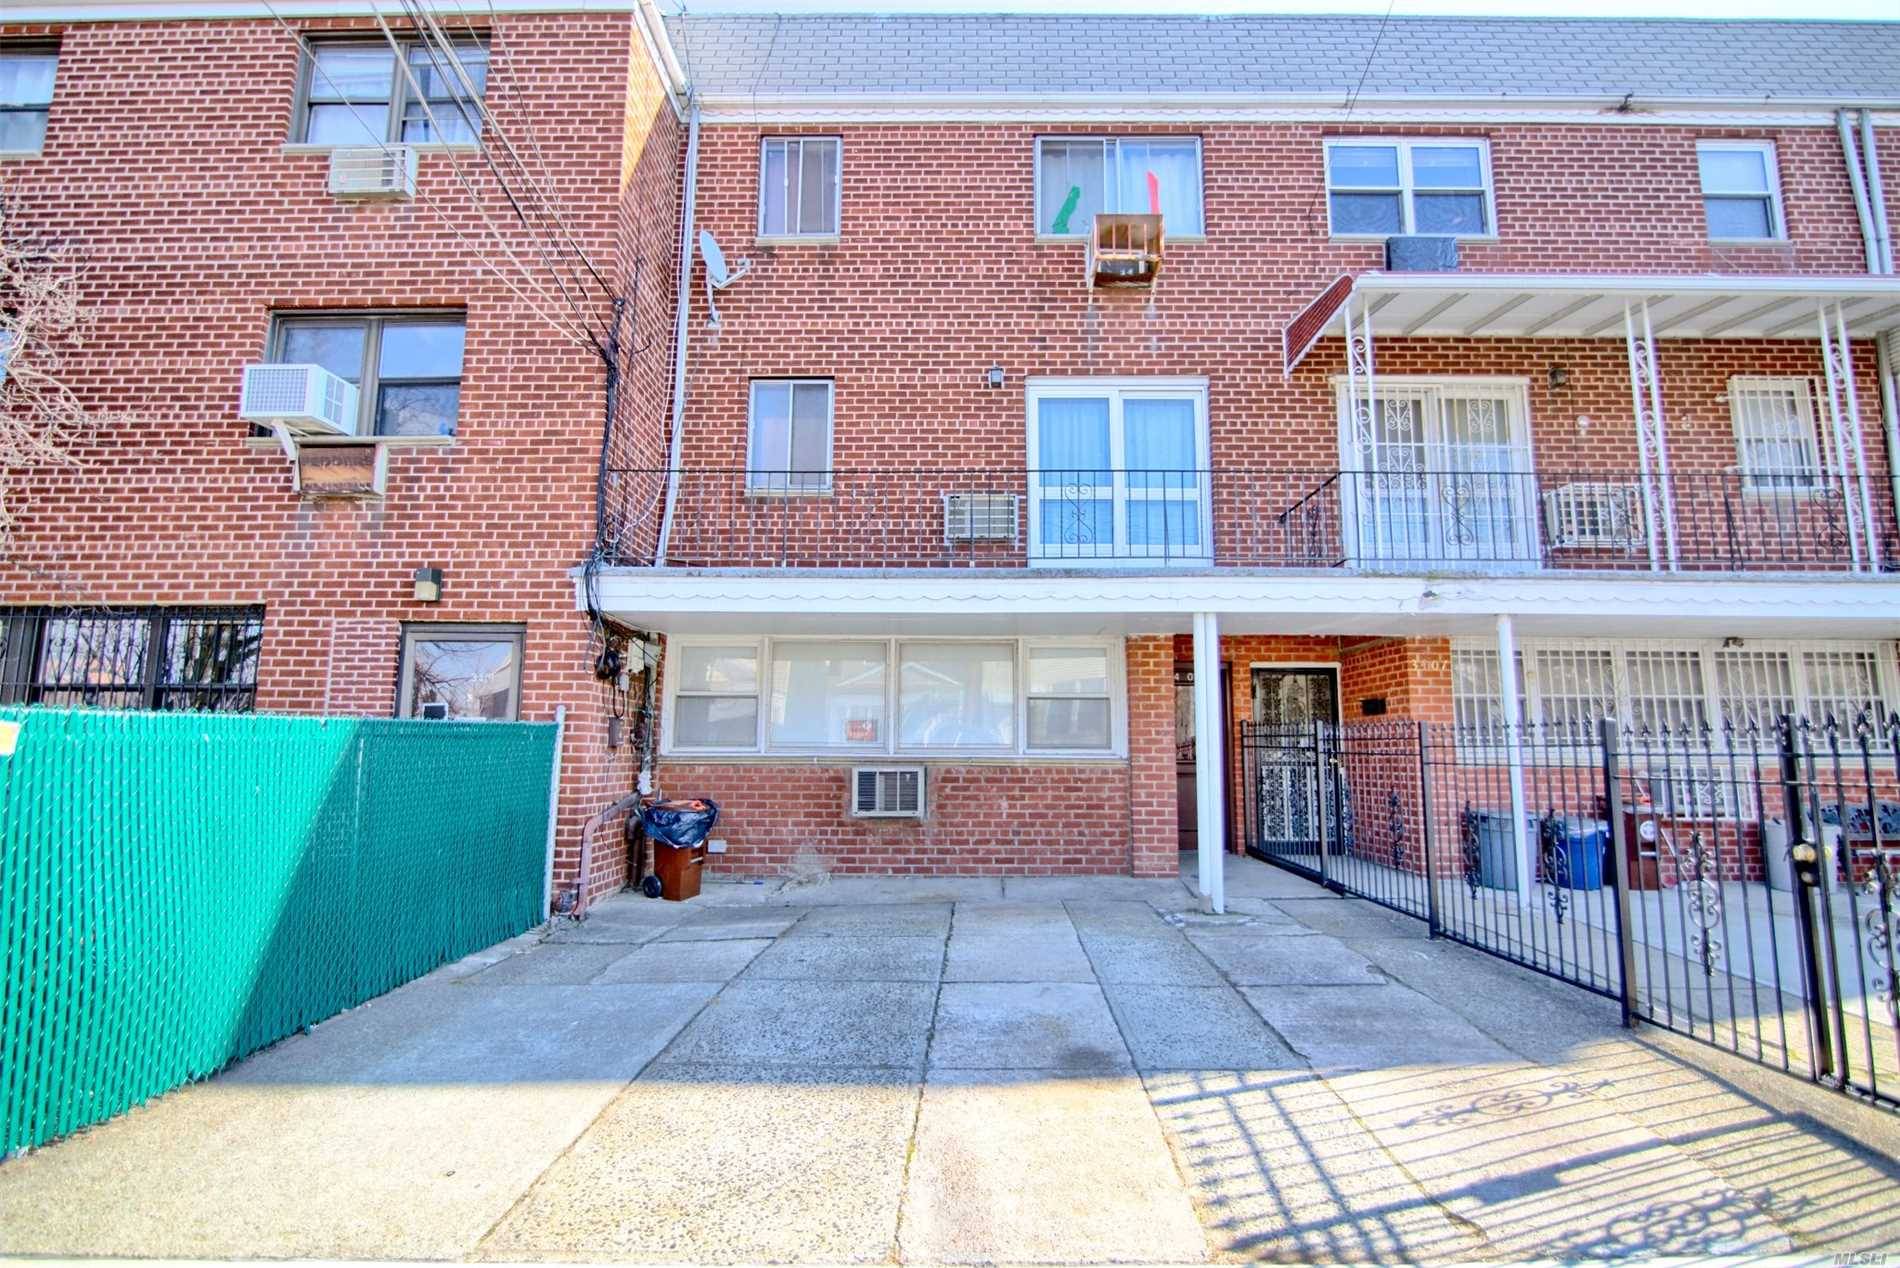 Motivated Seller Ready To Sell A Well Kept 2 Dwelling House Conveniently Located In Woodside.